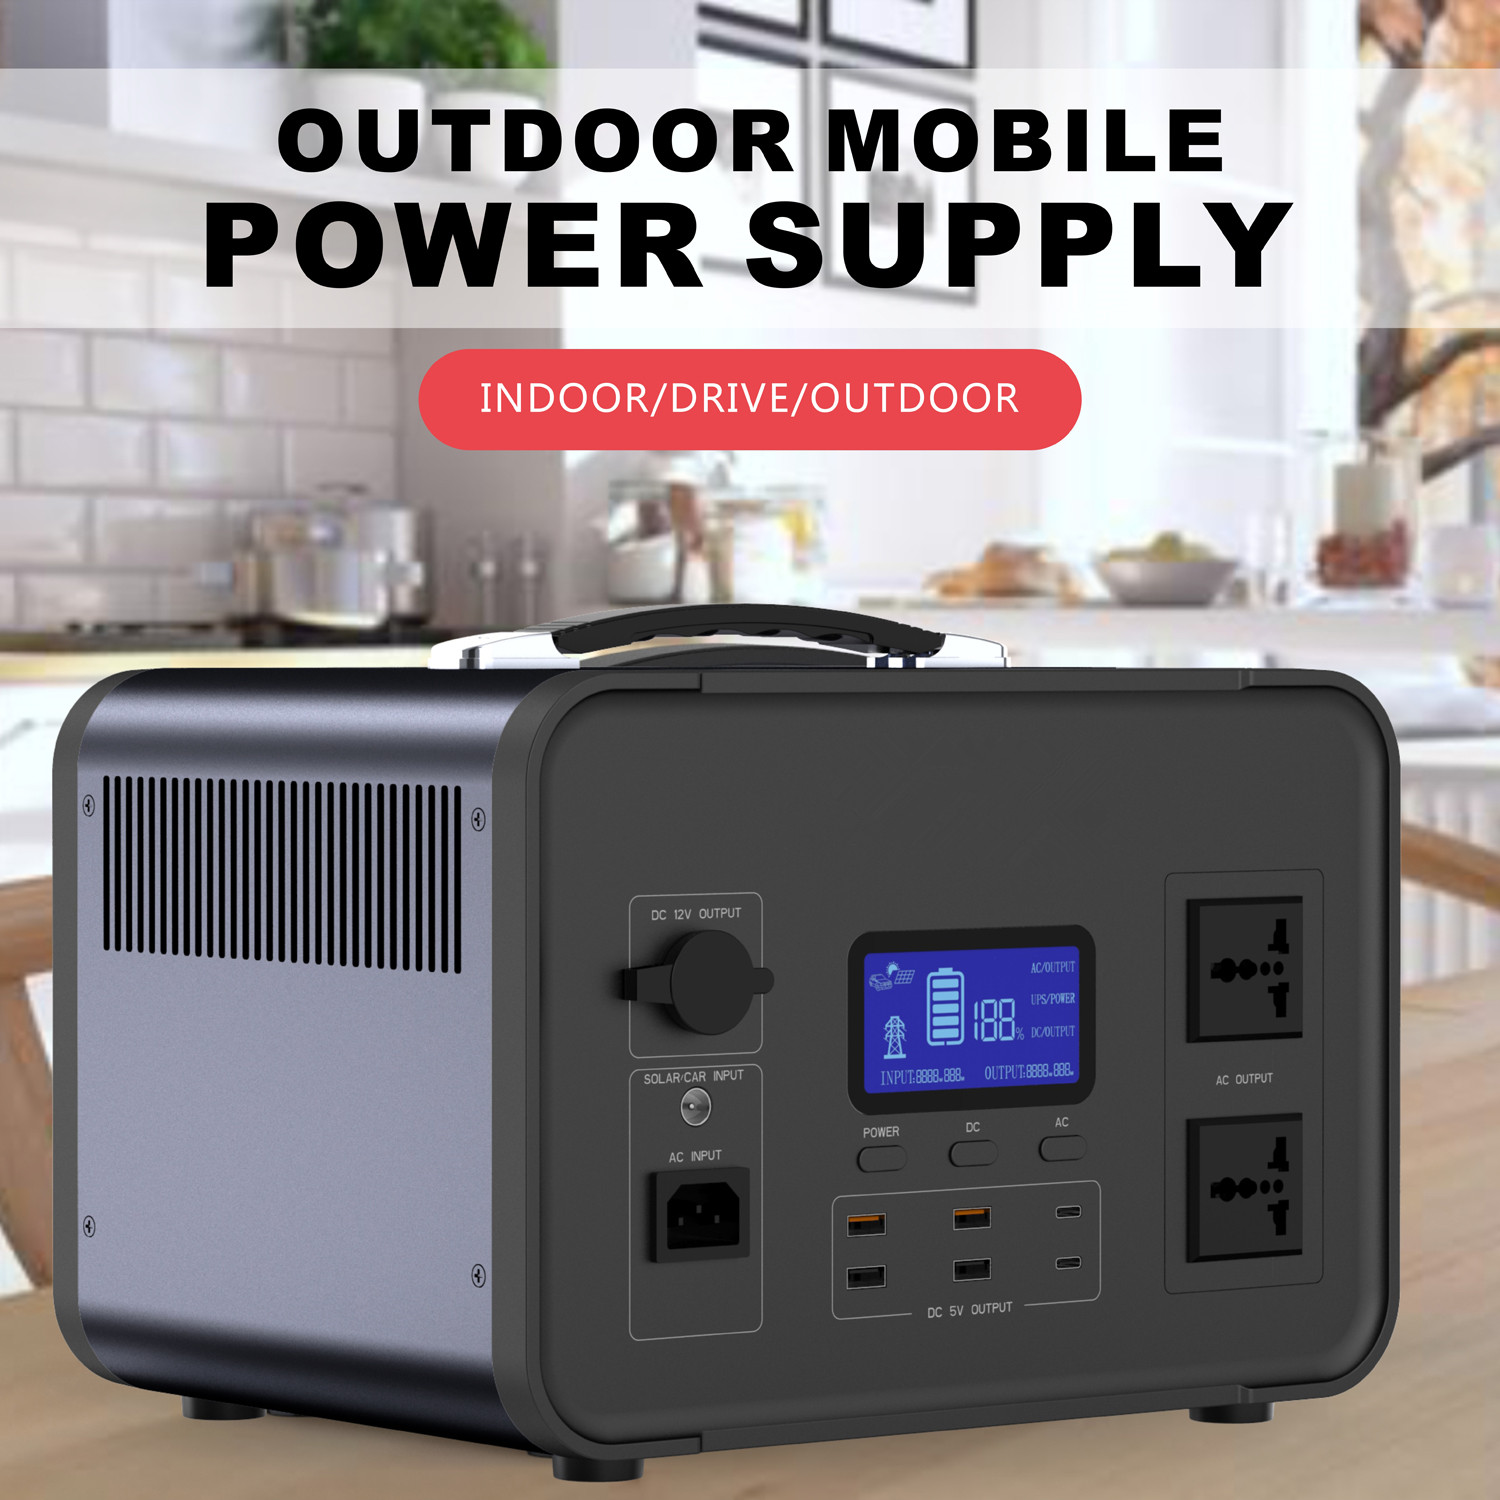 How to choose an outdoor energy storage power supply for camping 